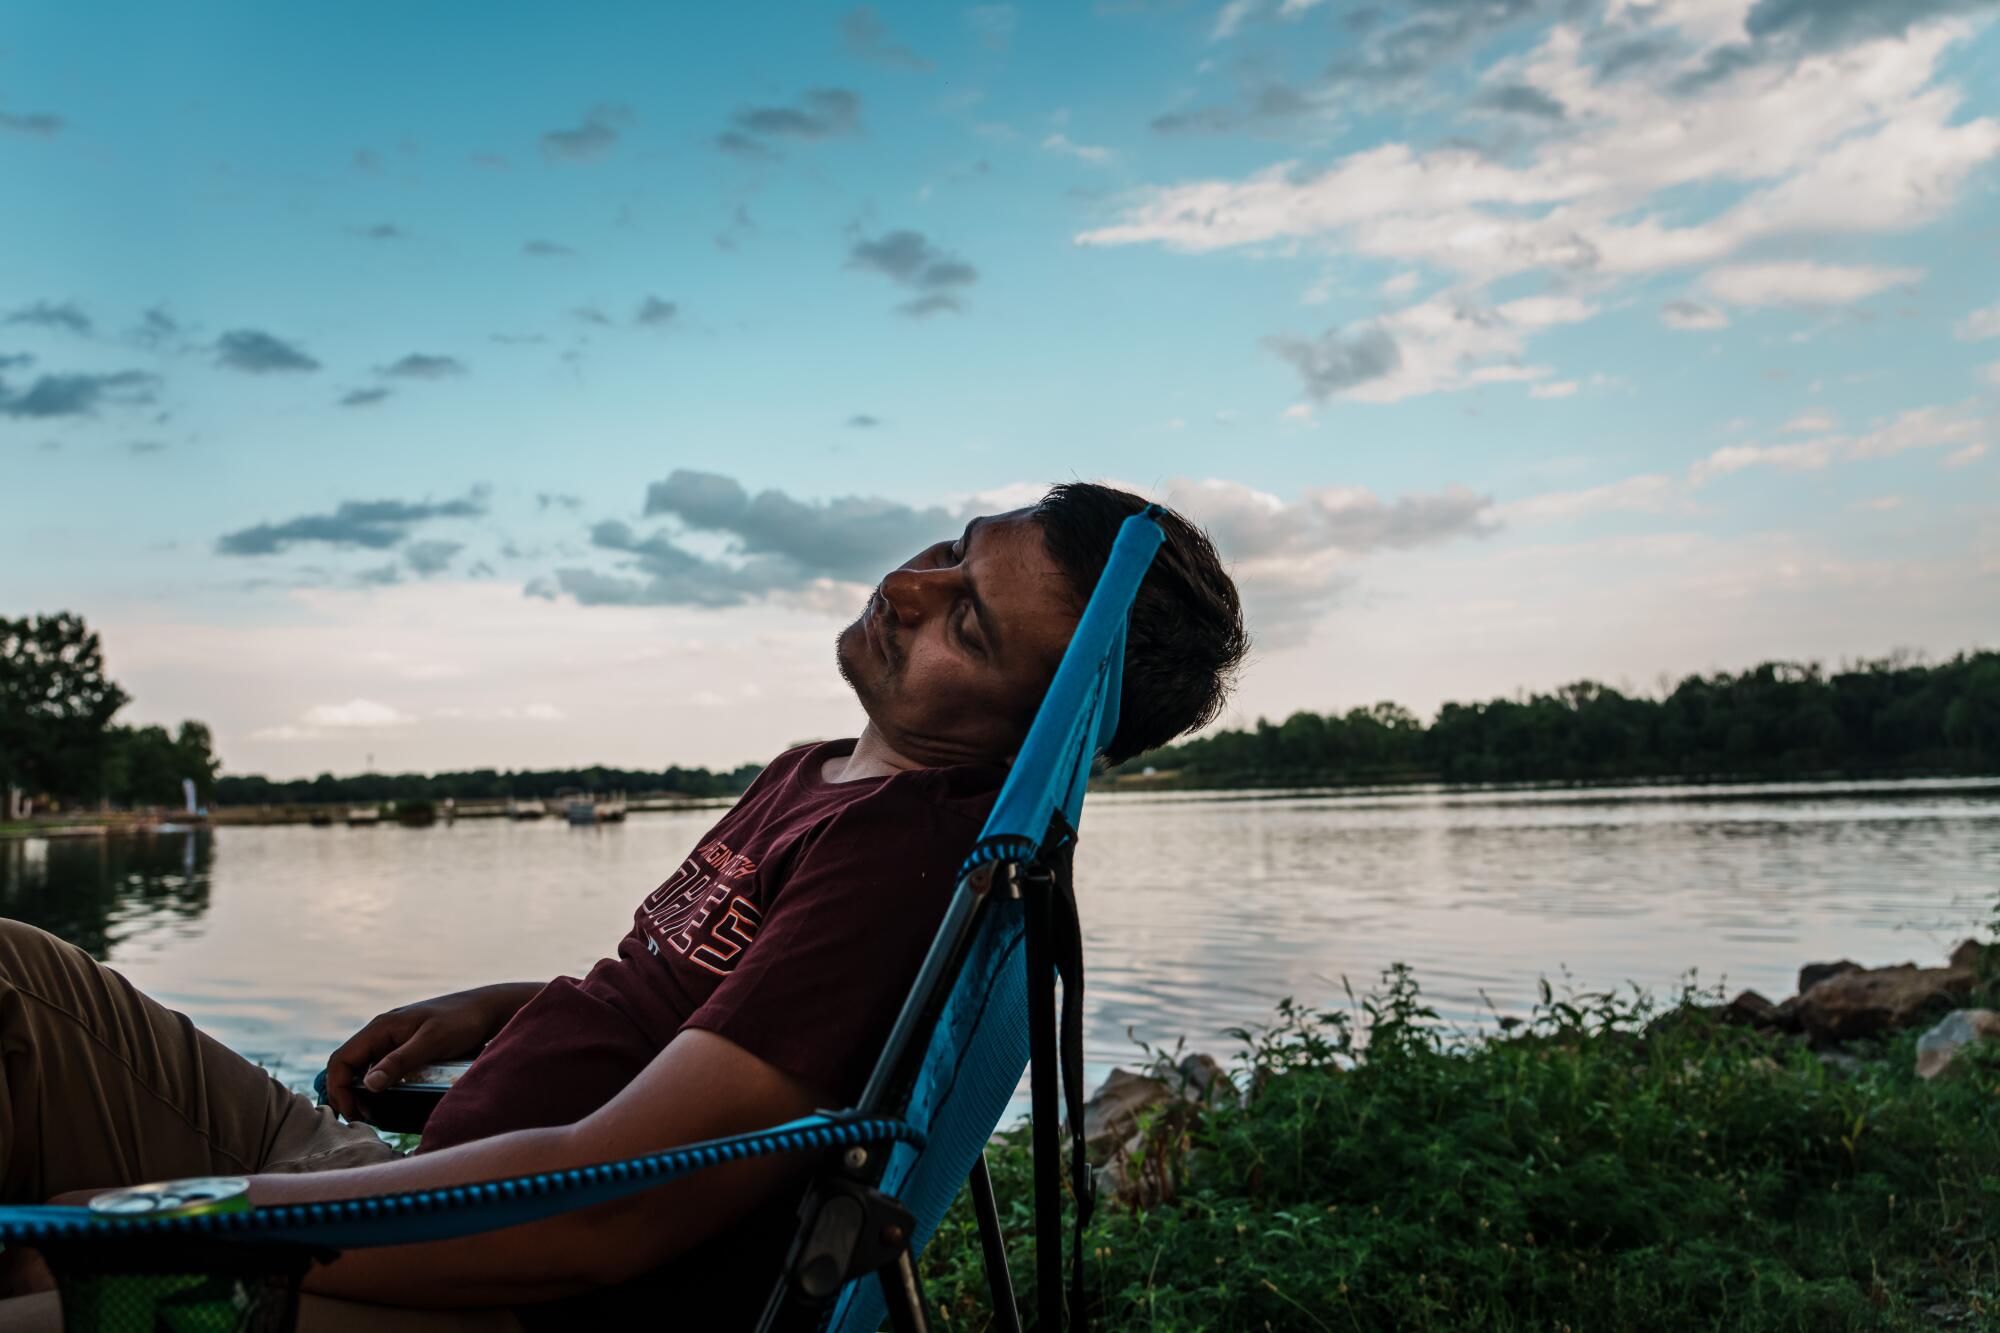 Man relaxes in chair with a lake and blue skies as a backdrop 